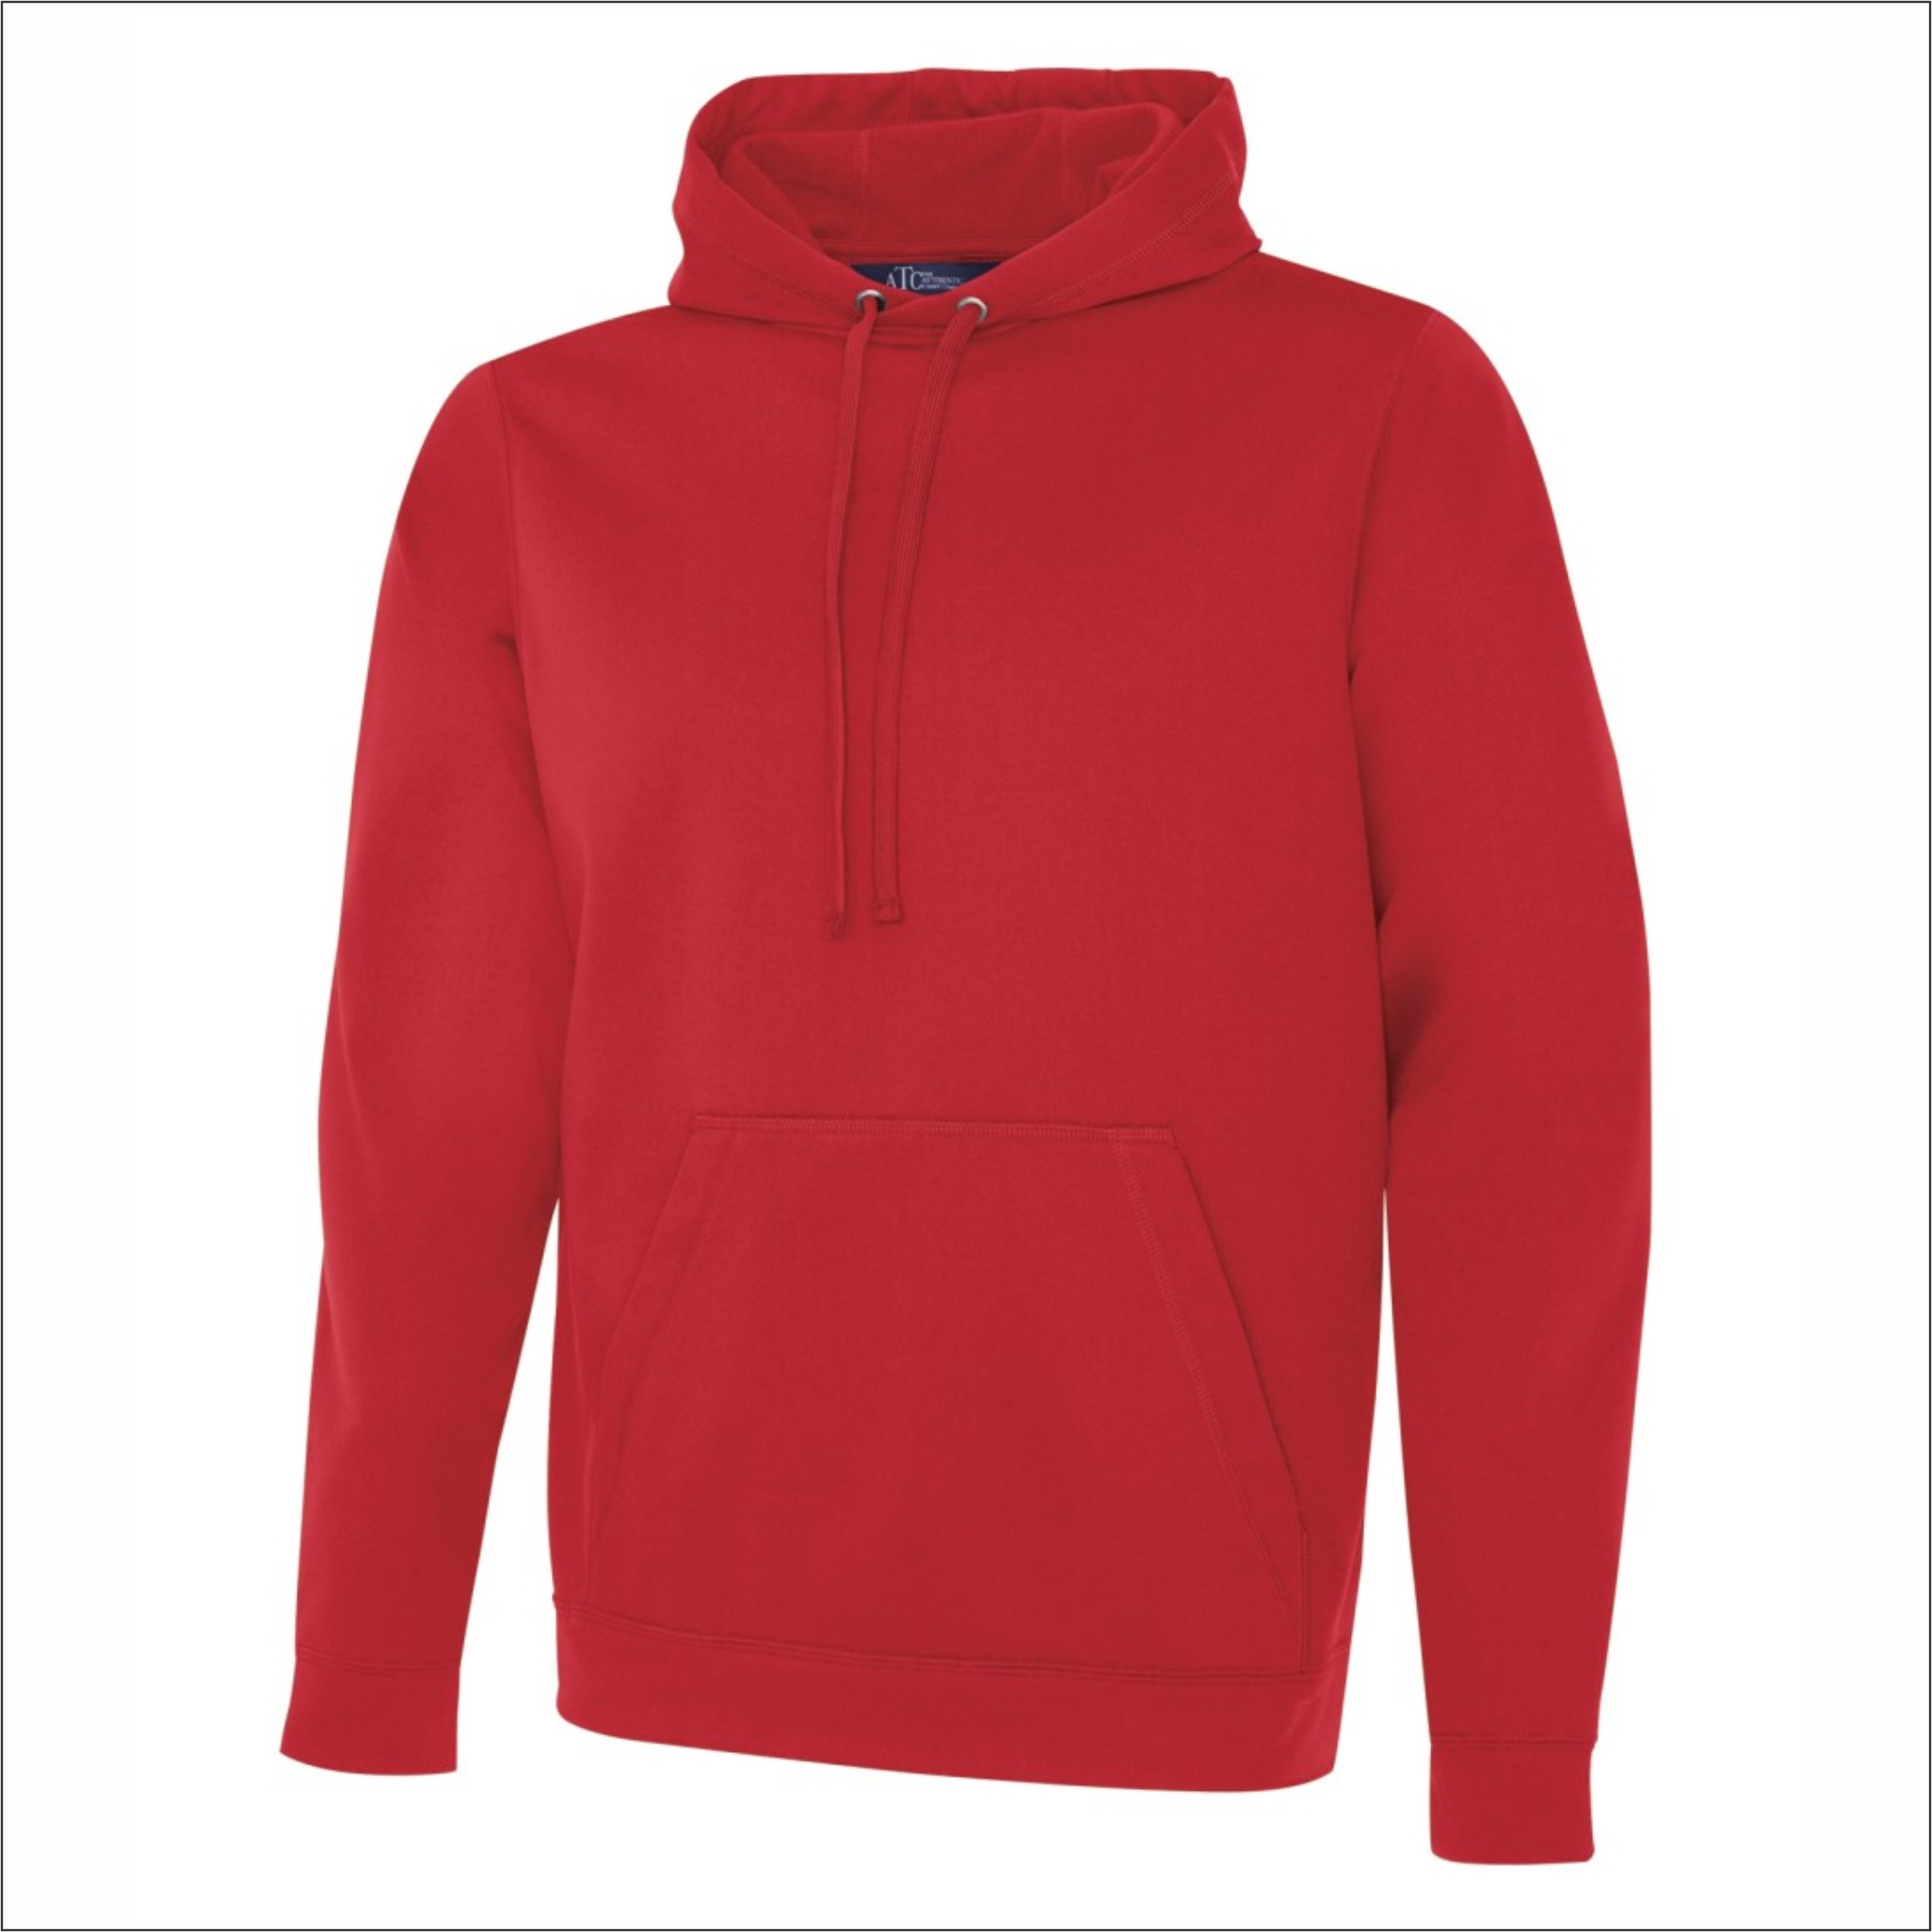 Mens Hoodie - Polyester - ATC F2005